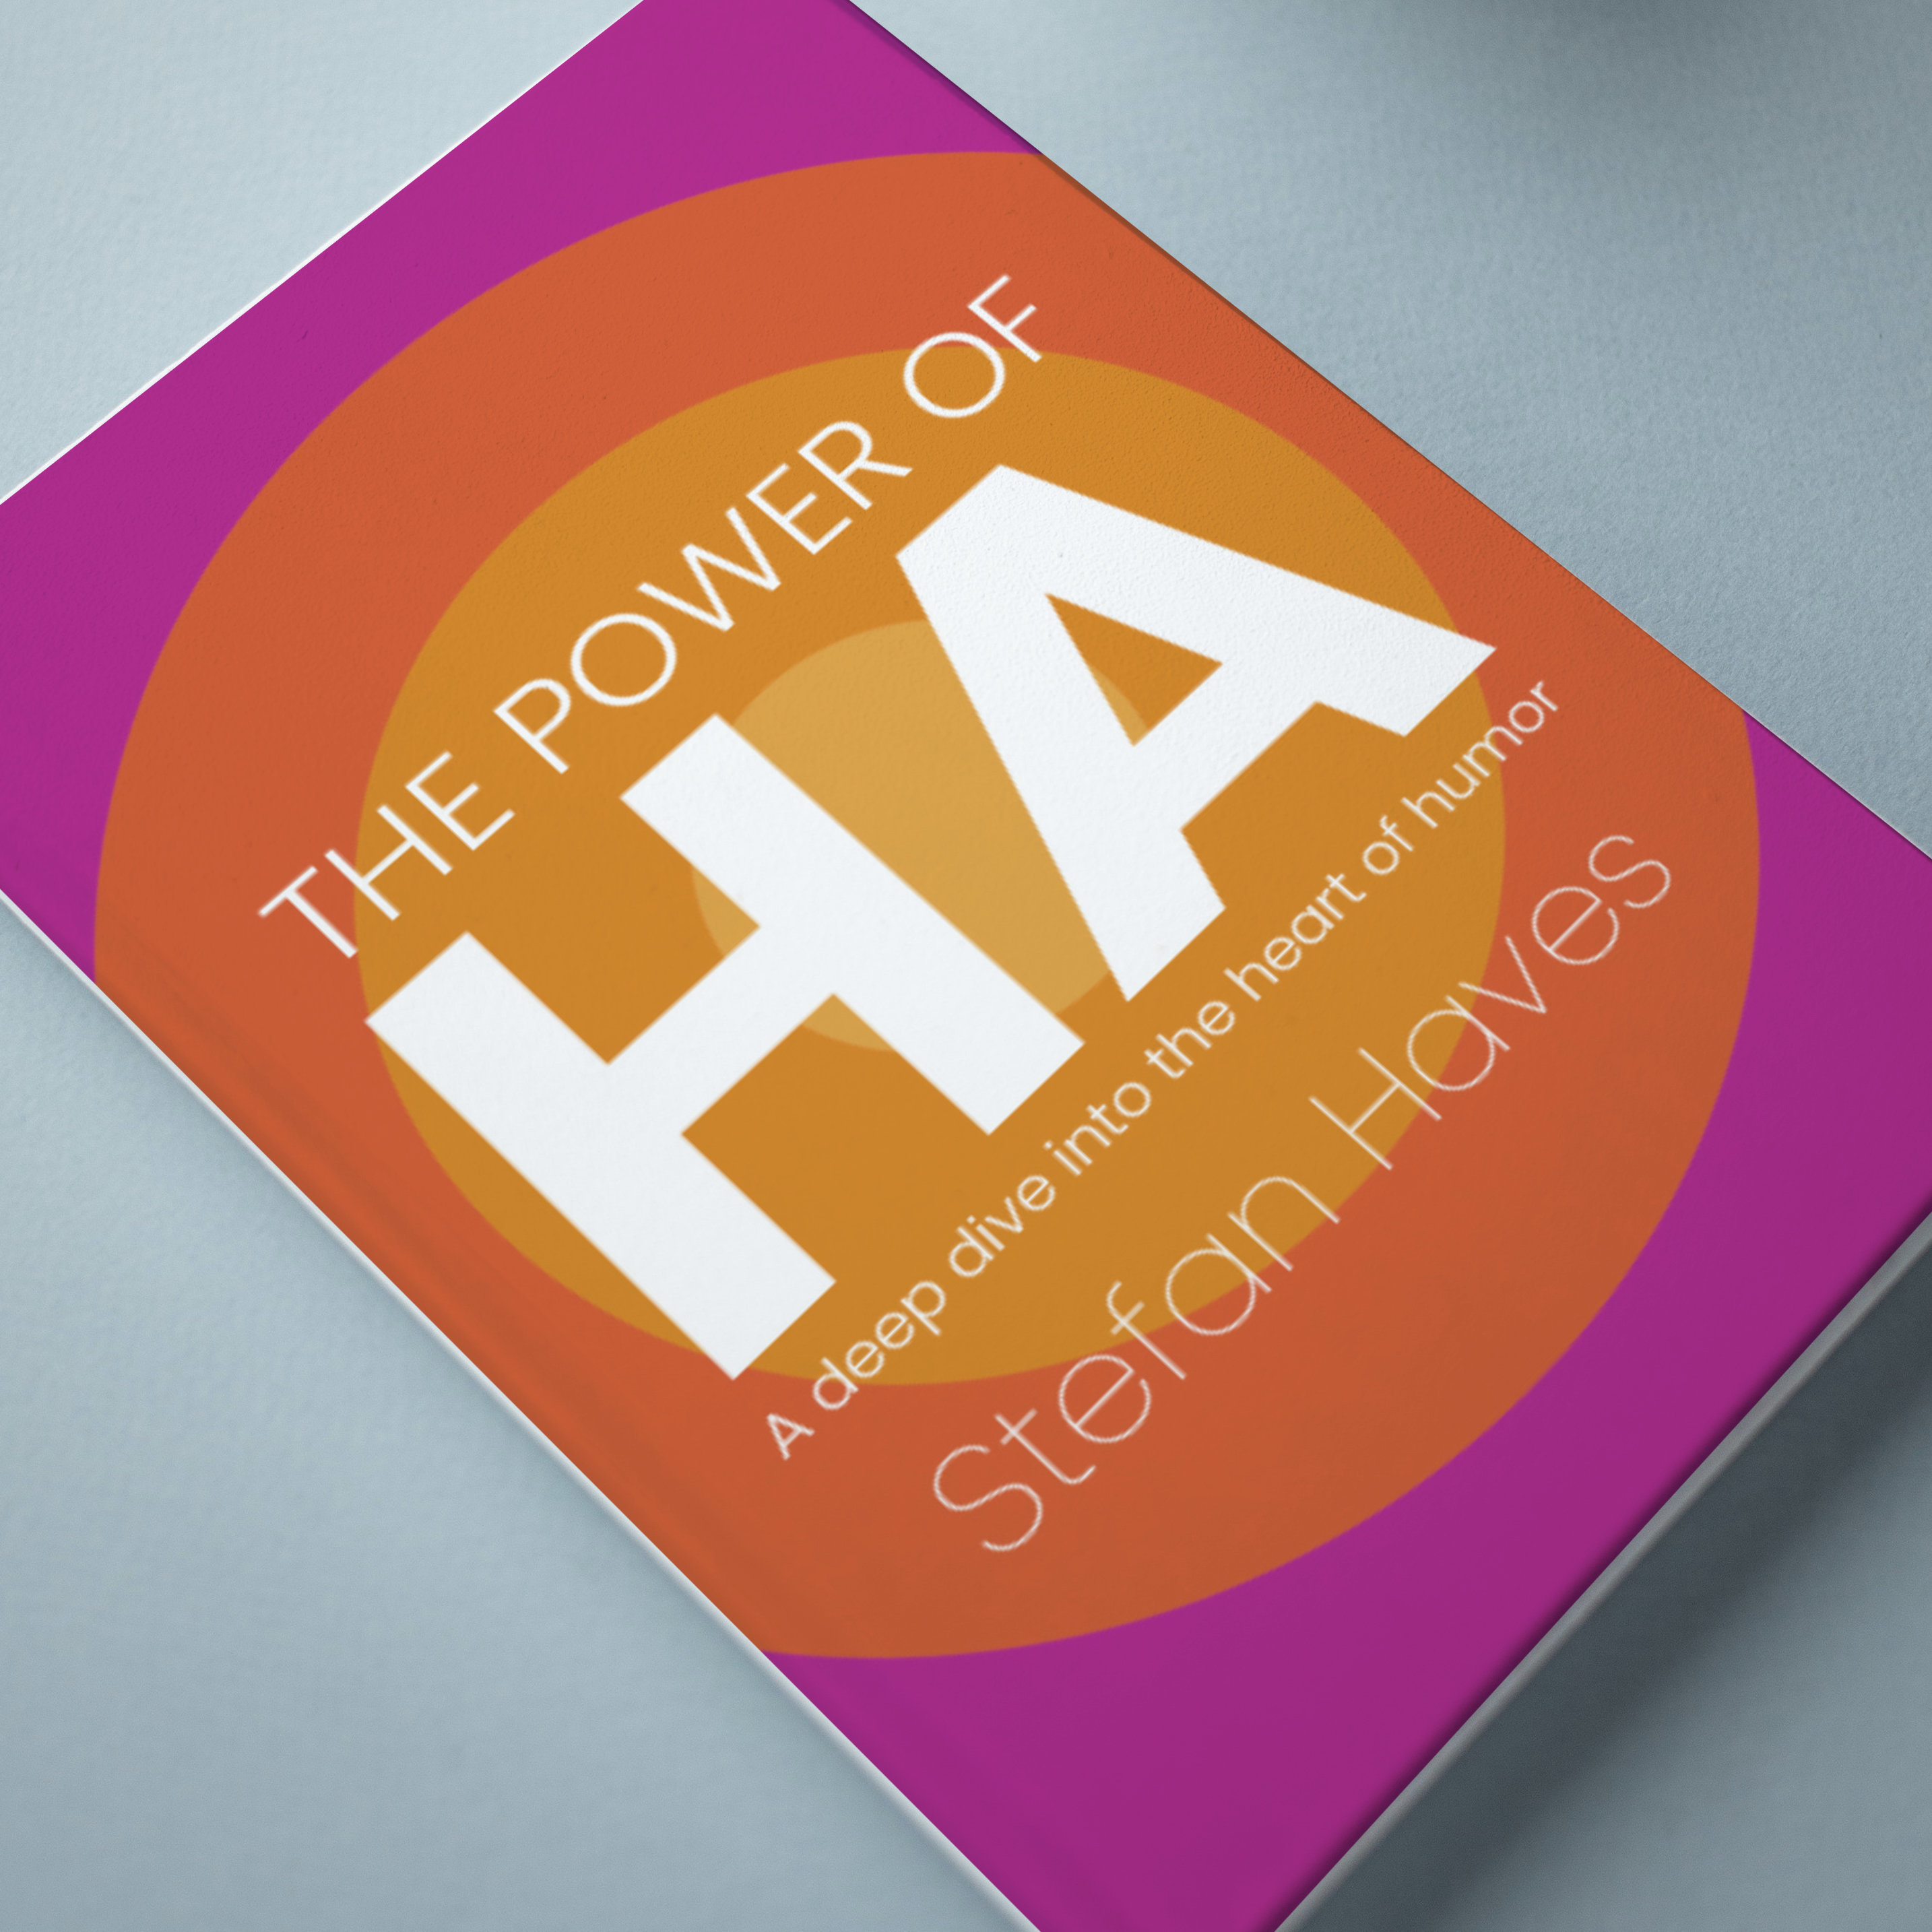 the power of ha book stefan haves